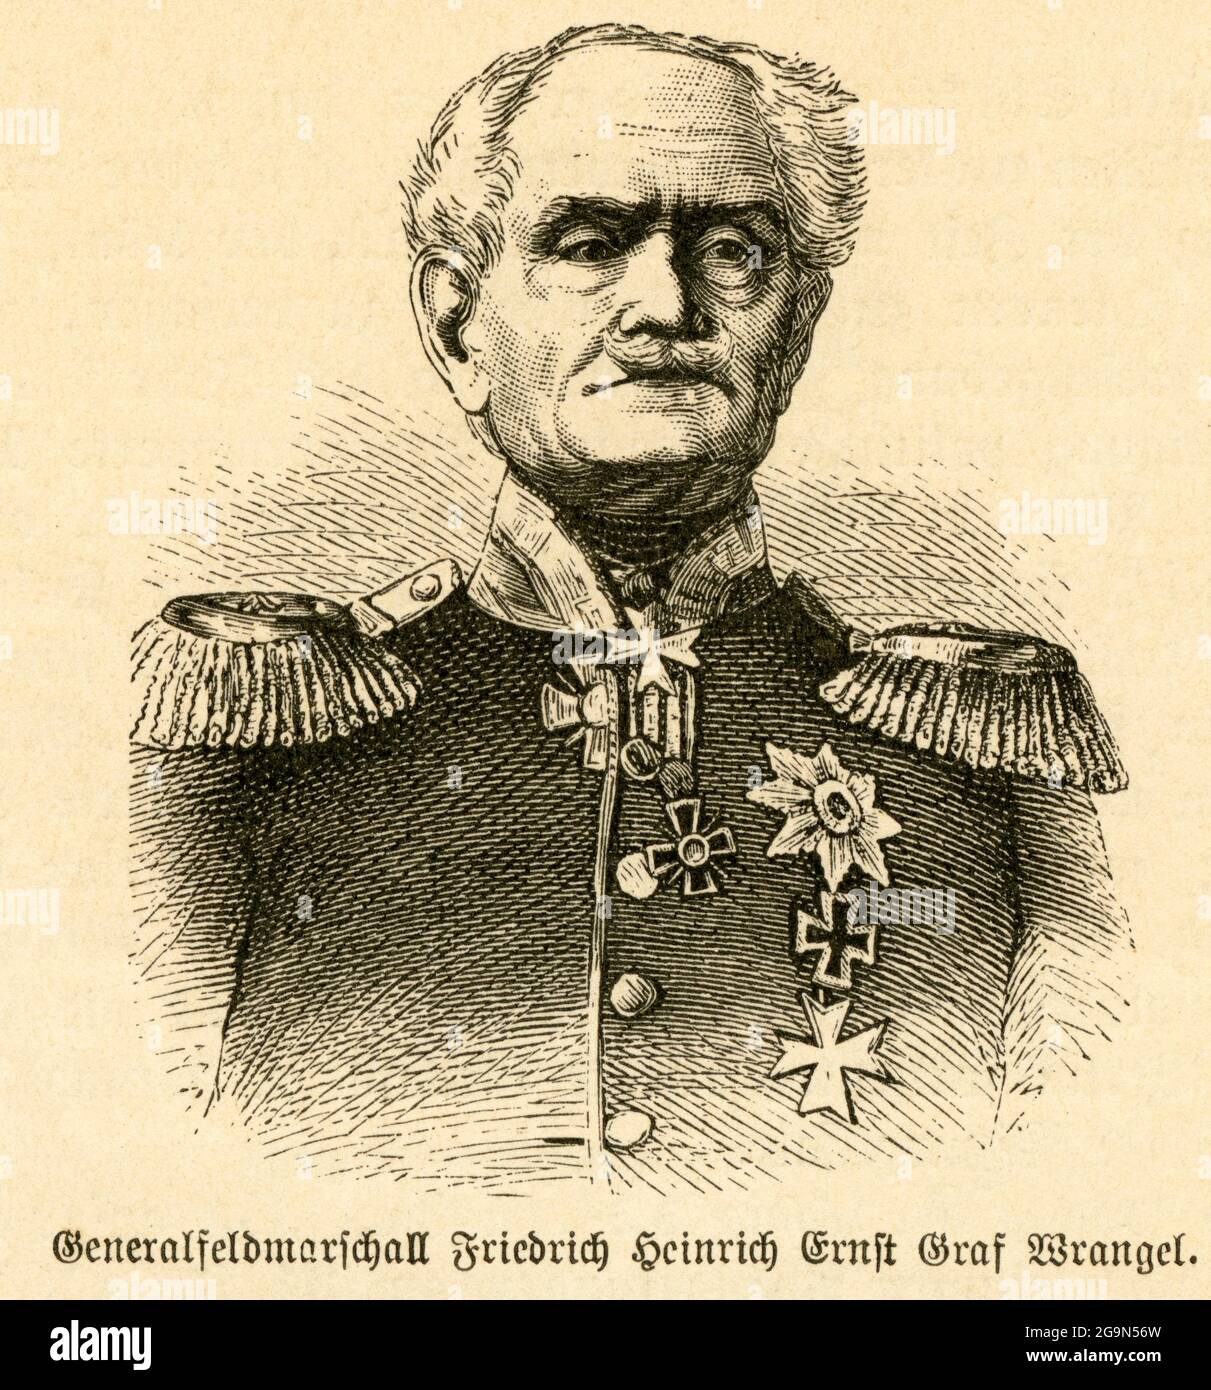 Europe, Germany, Friedrich von Wrangel, Prussian Field Marshal, ARTIST'S COPYRIGHT HAS NOT TO BE CLEARED Stock Photo